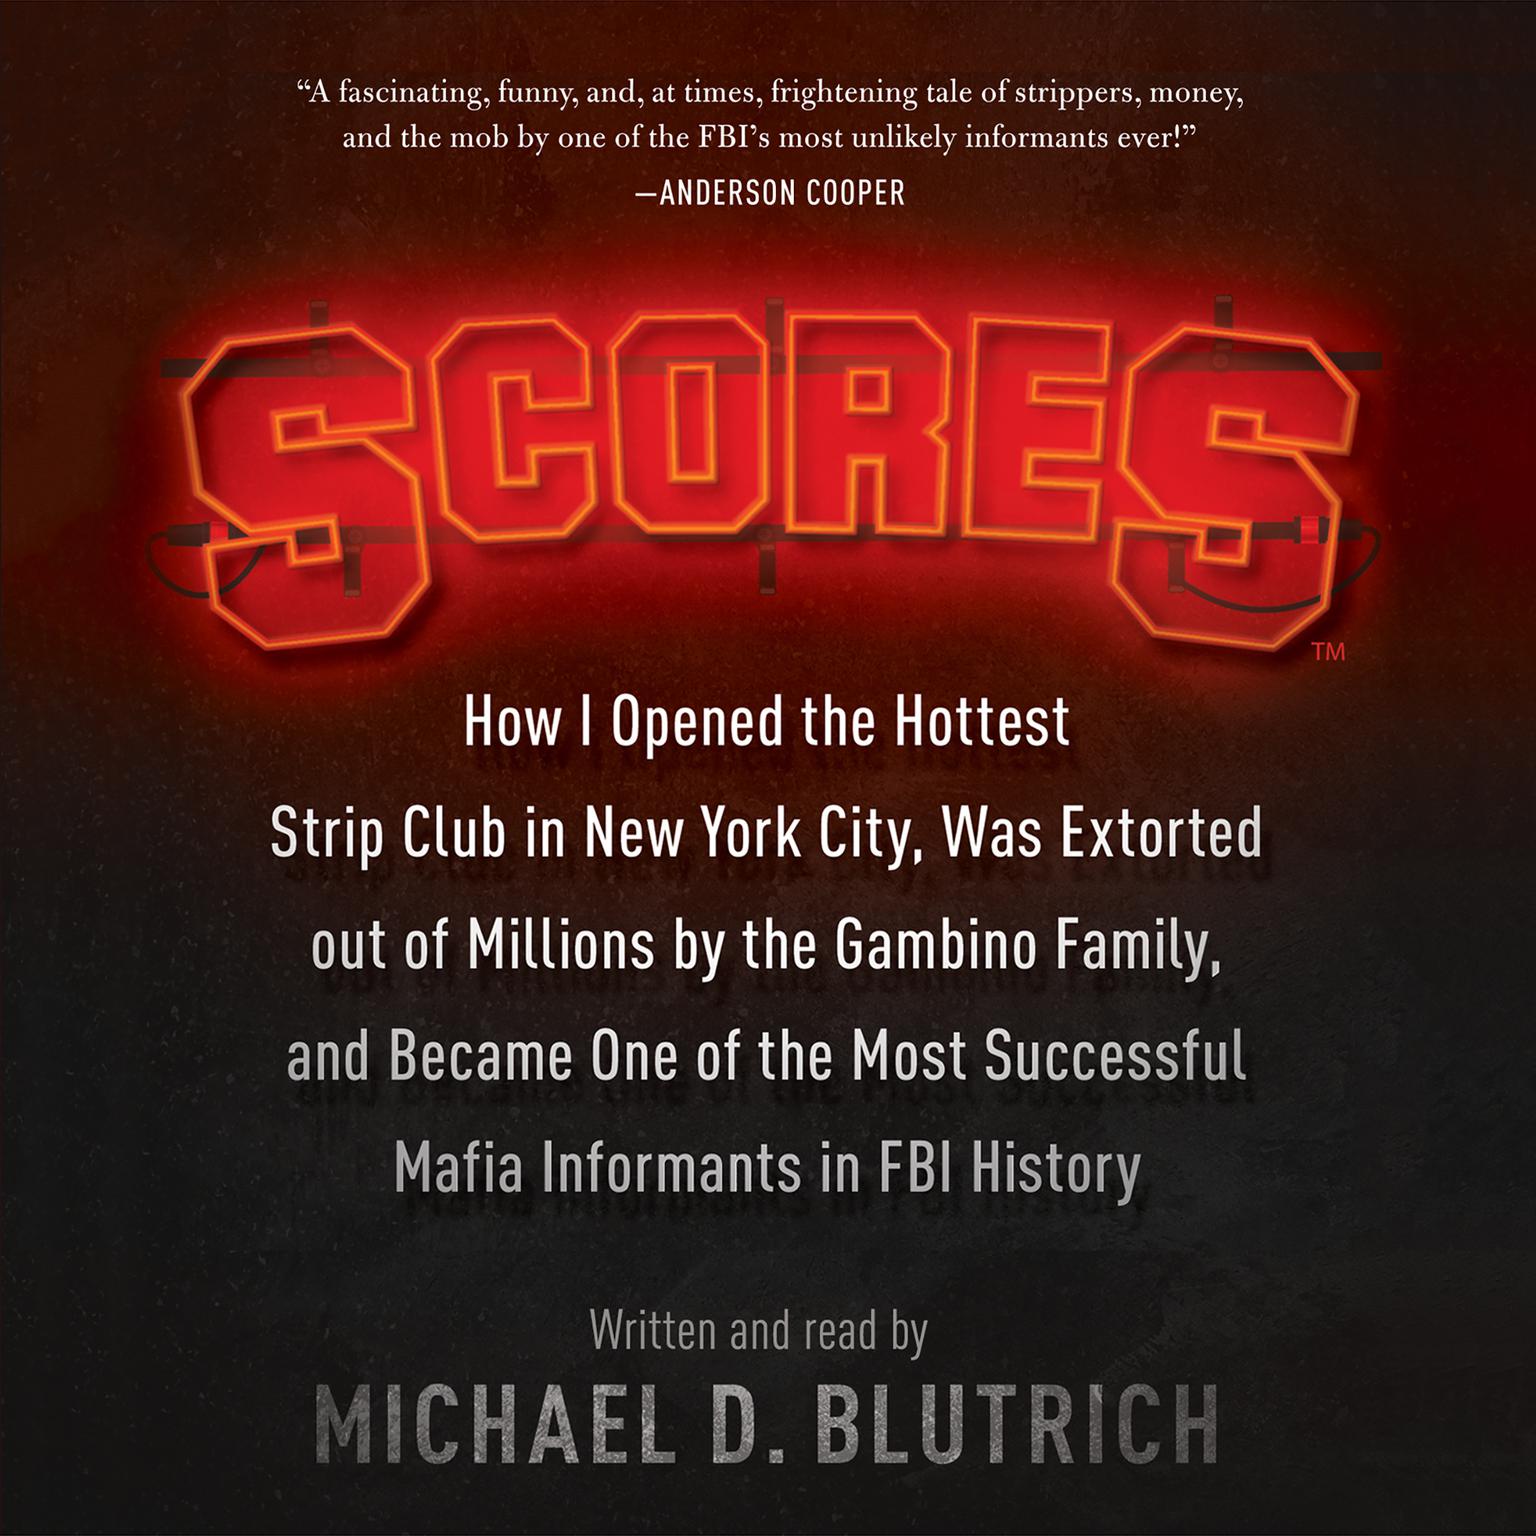 Scores: How I Opened the Hottest Strip Club in New York City, Was Extorted out of Millions by the Gambino Family, and Became One of the Most Successful Mafia Informants in FBI History Audiobook, by Michael D. Blutrich